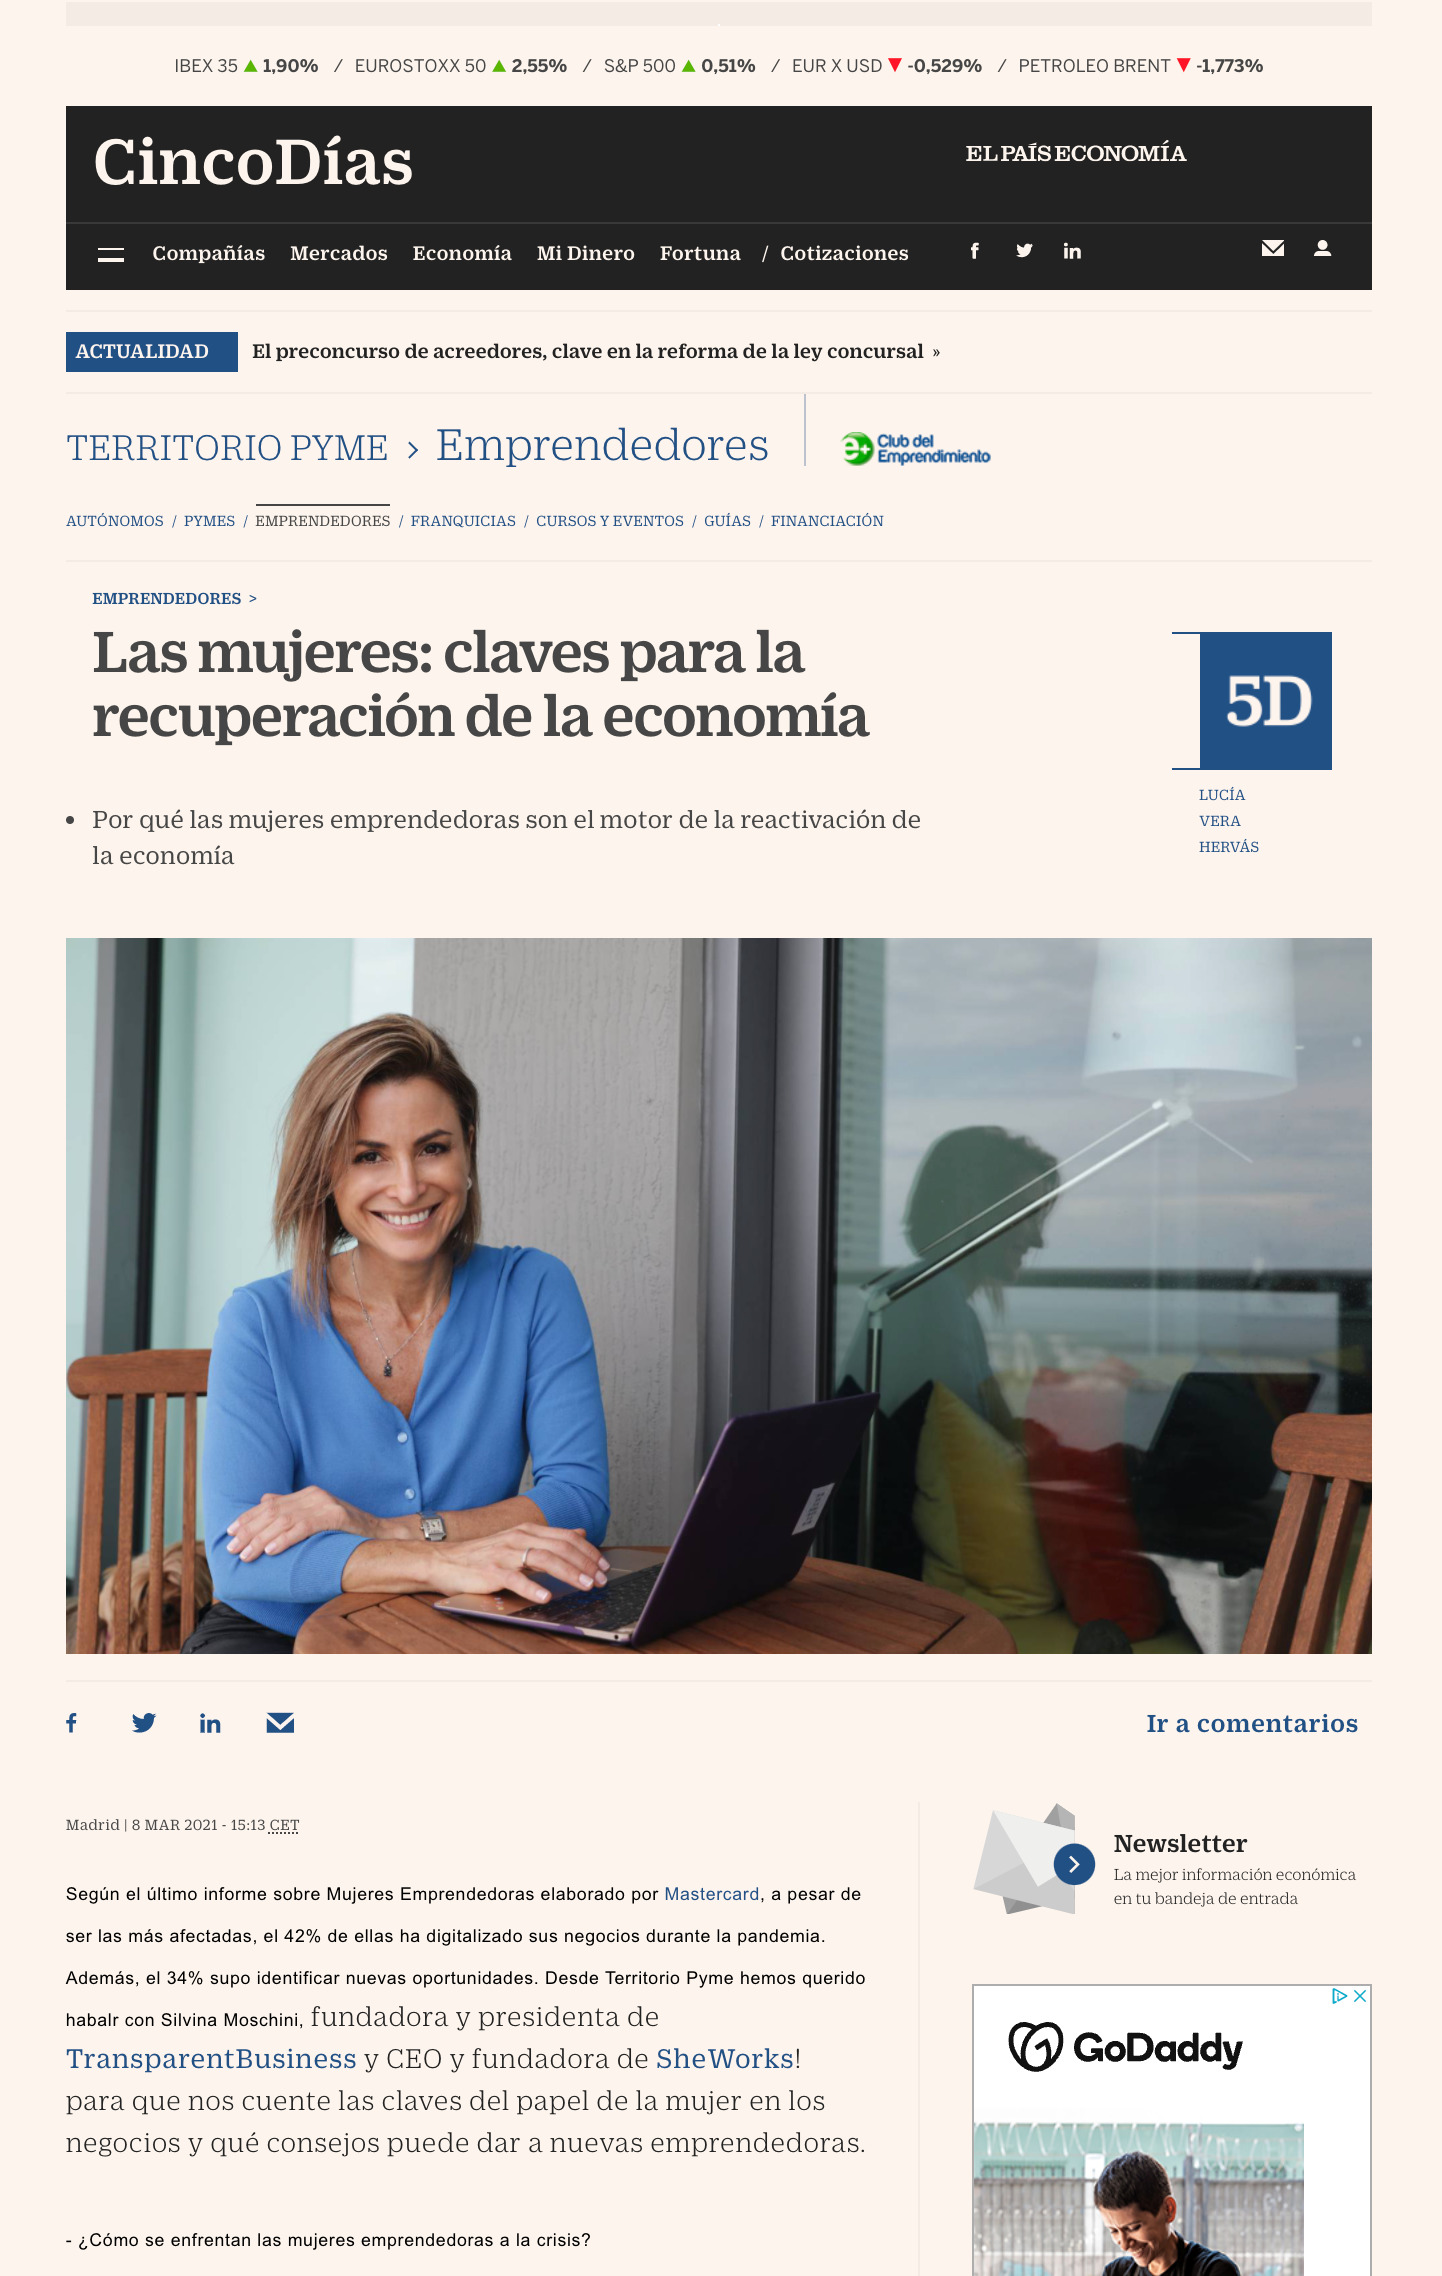 El País interview with Silvina Moschini